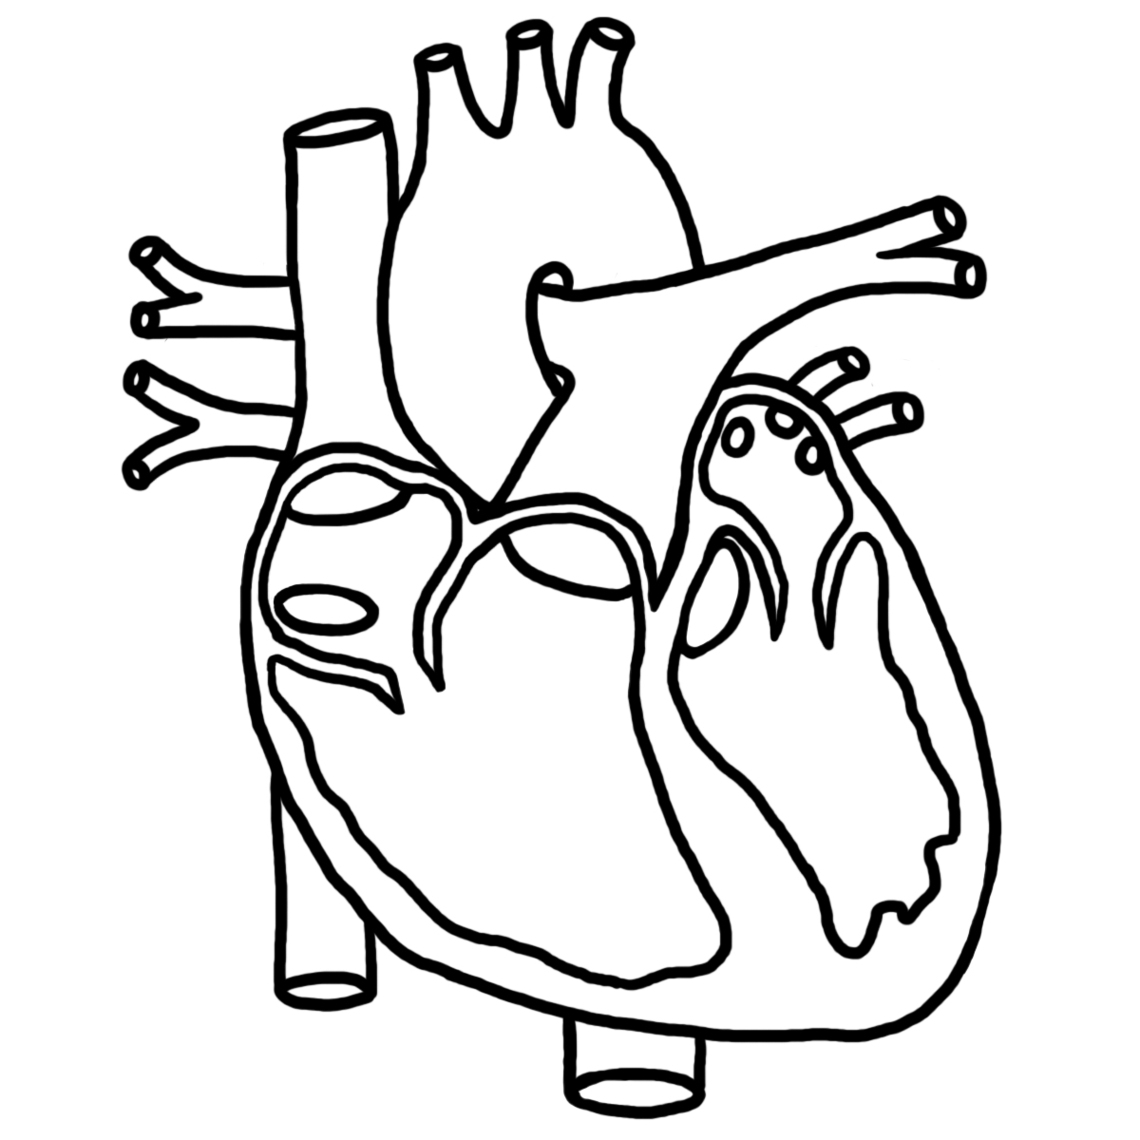 Heart Anatomy Coloring Page